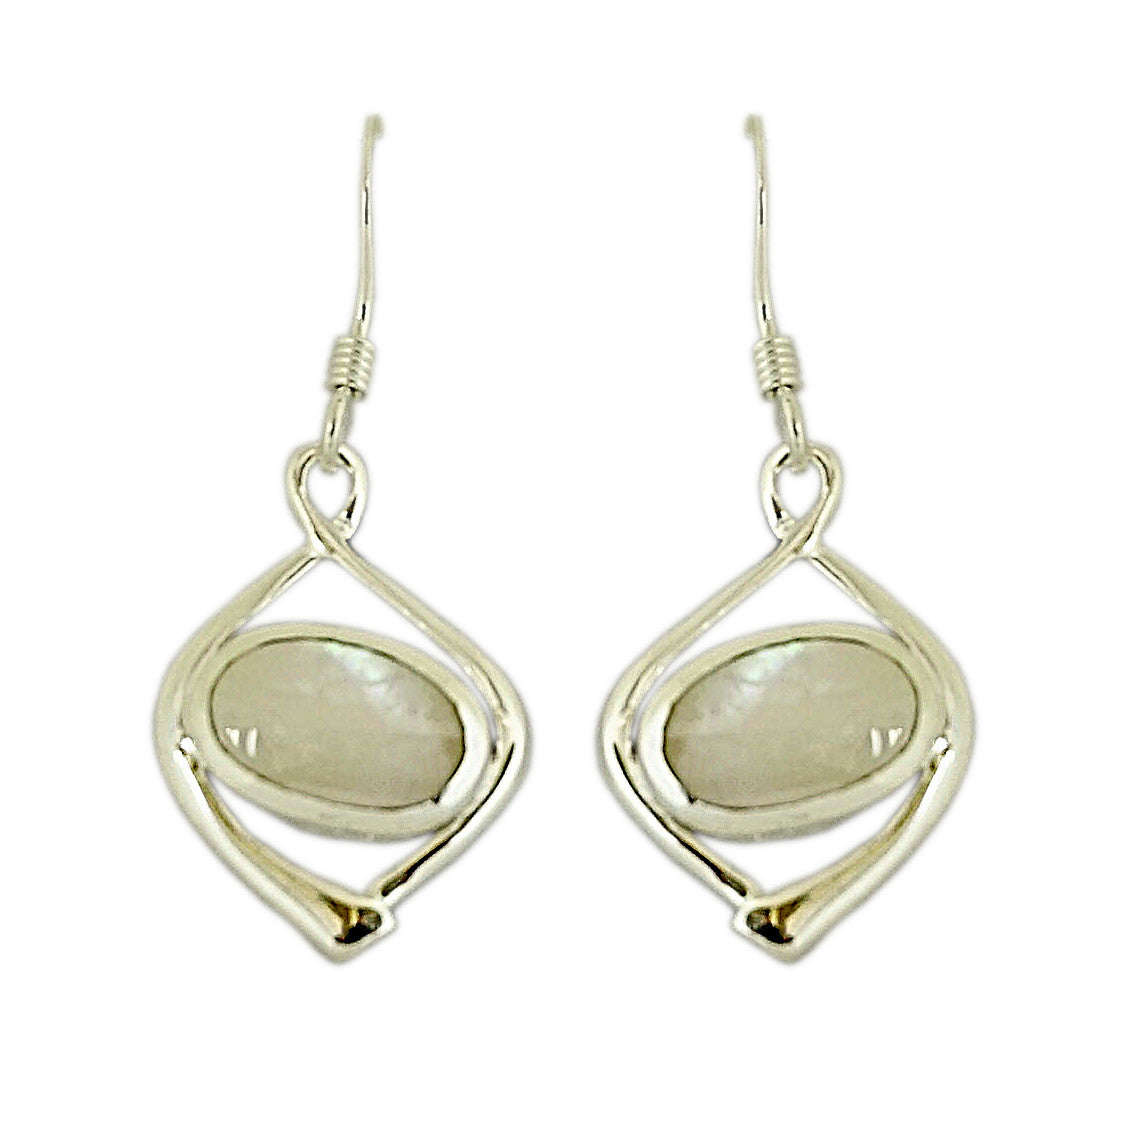 Mother of Pearl Oval Stone Drop Earrings with Hook Backs